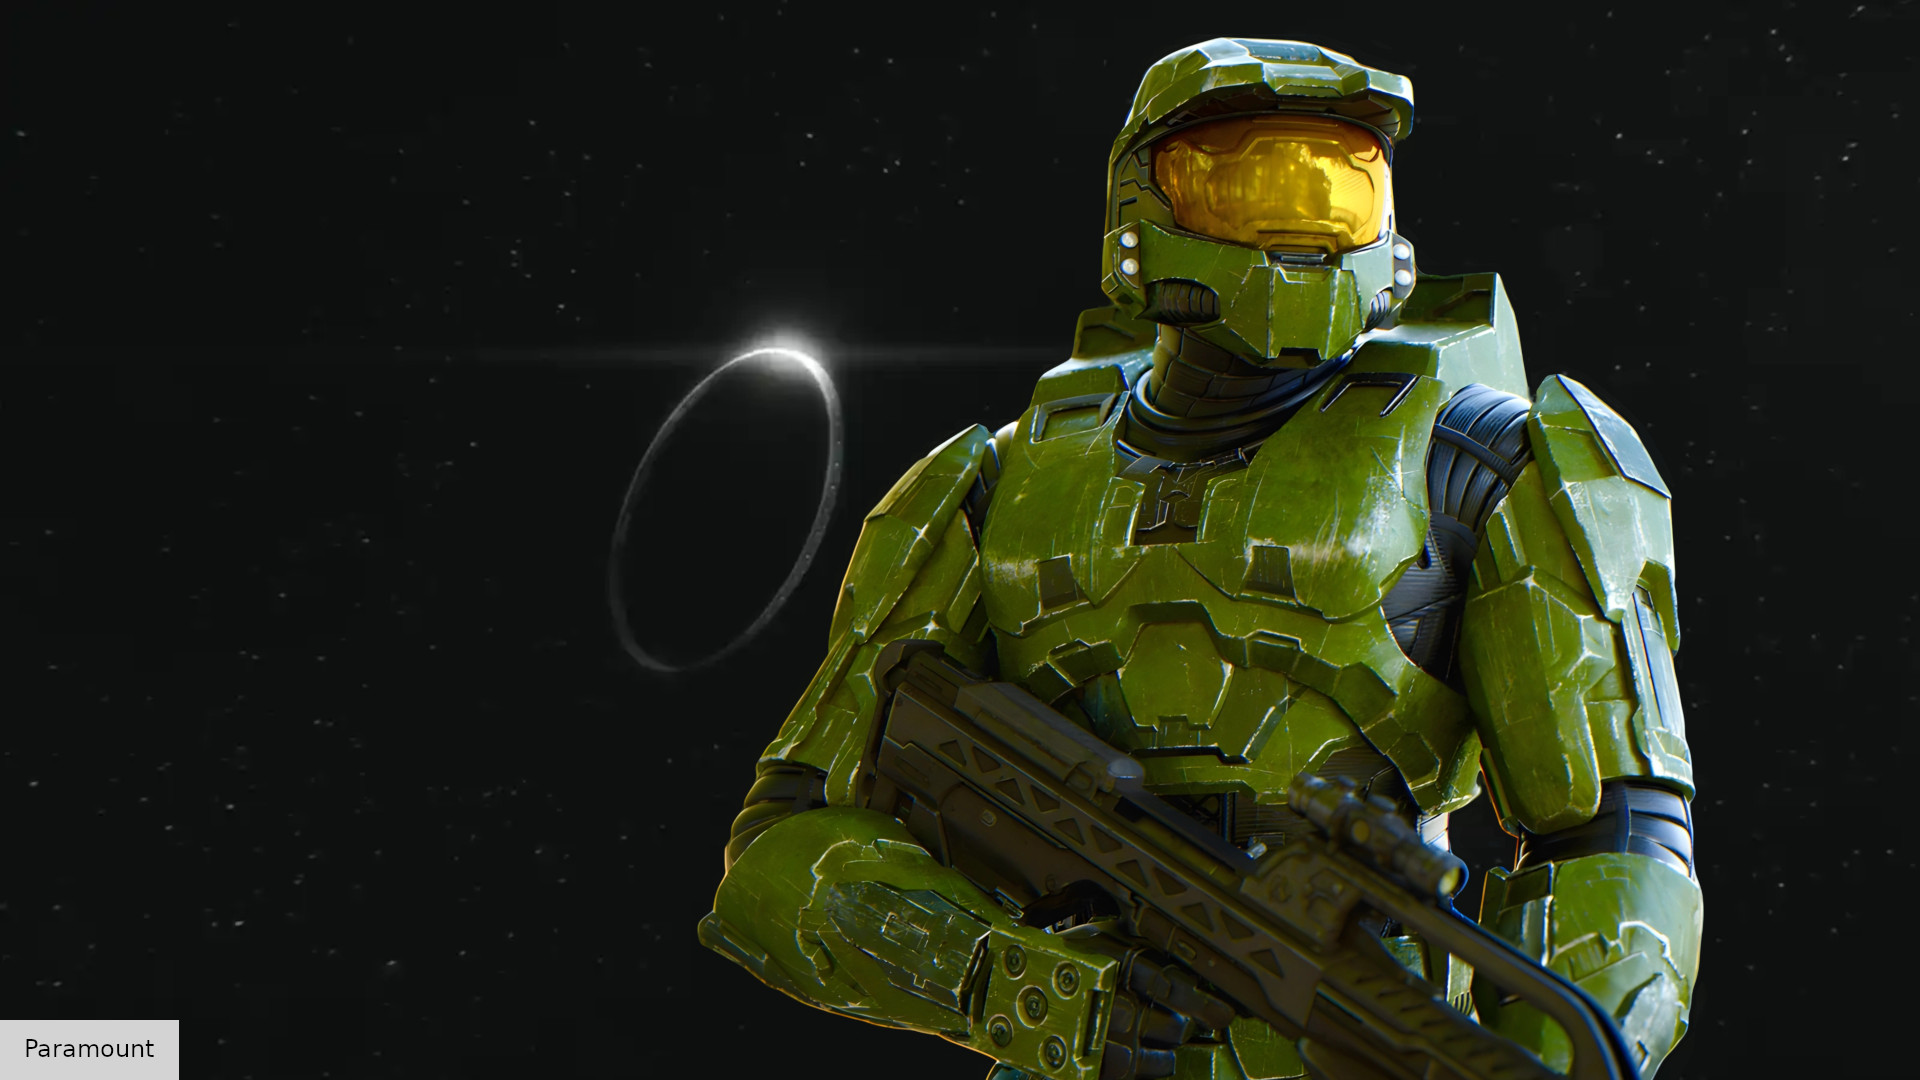 Check out the trailer for the new Halo TV Series